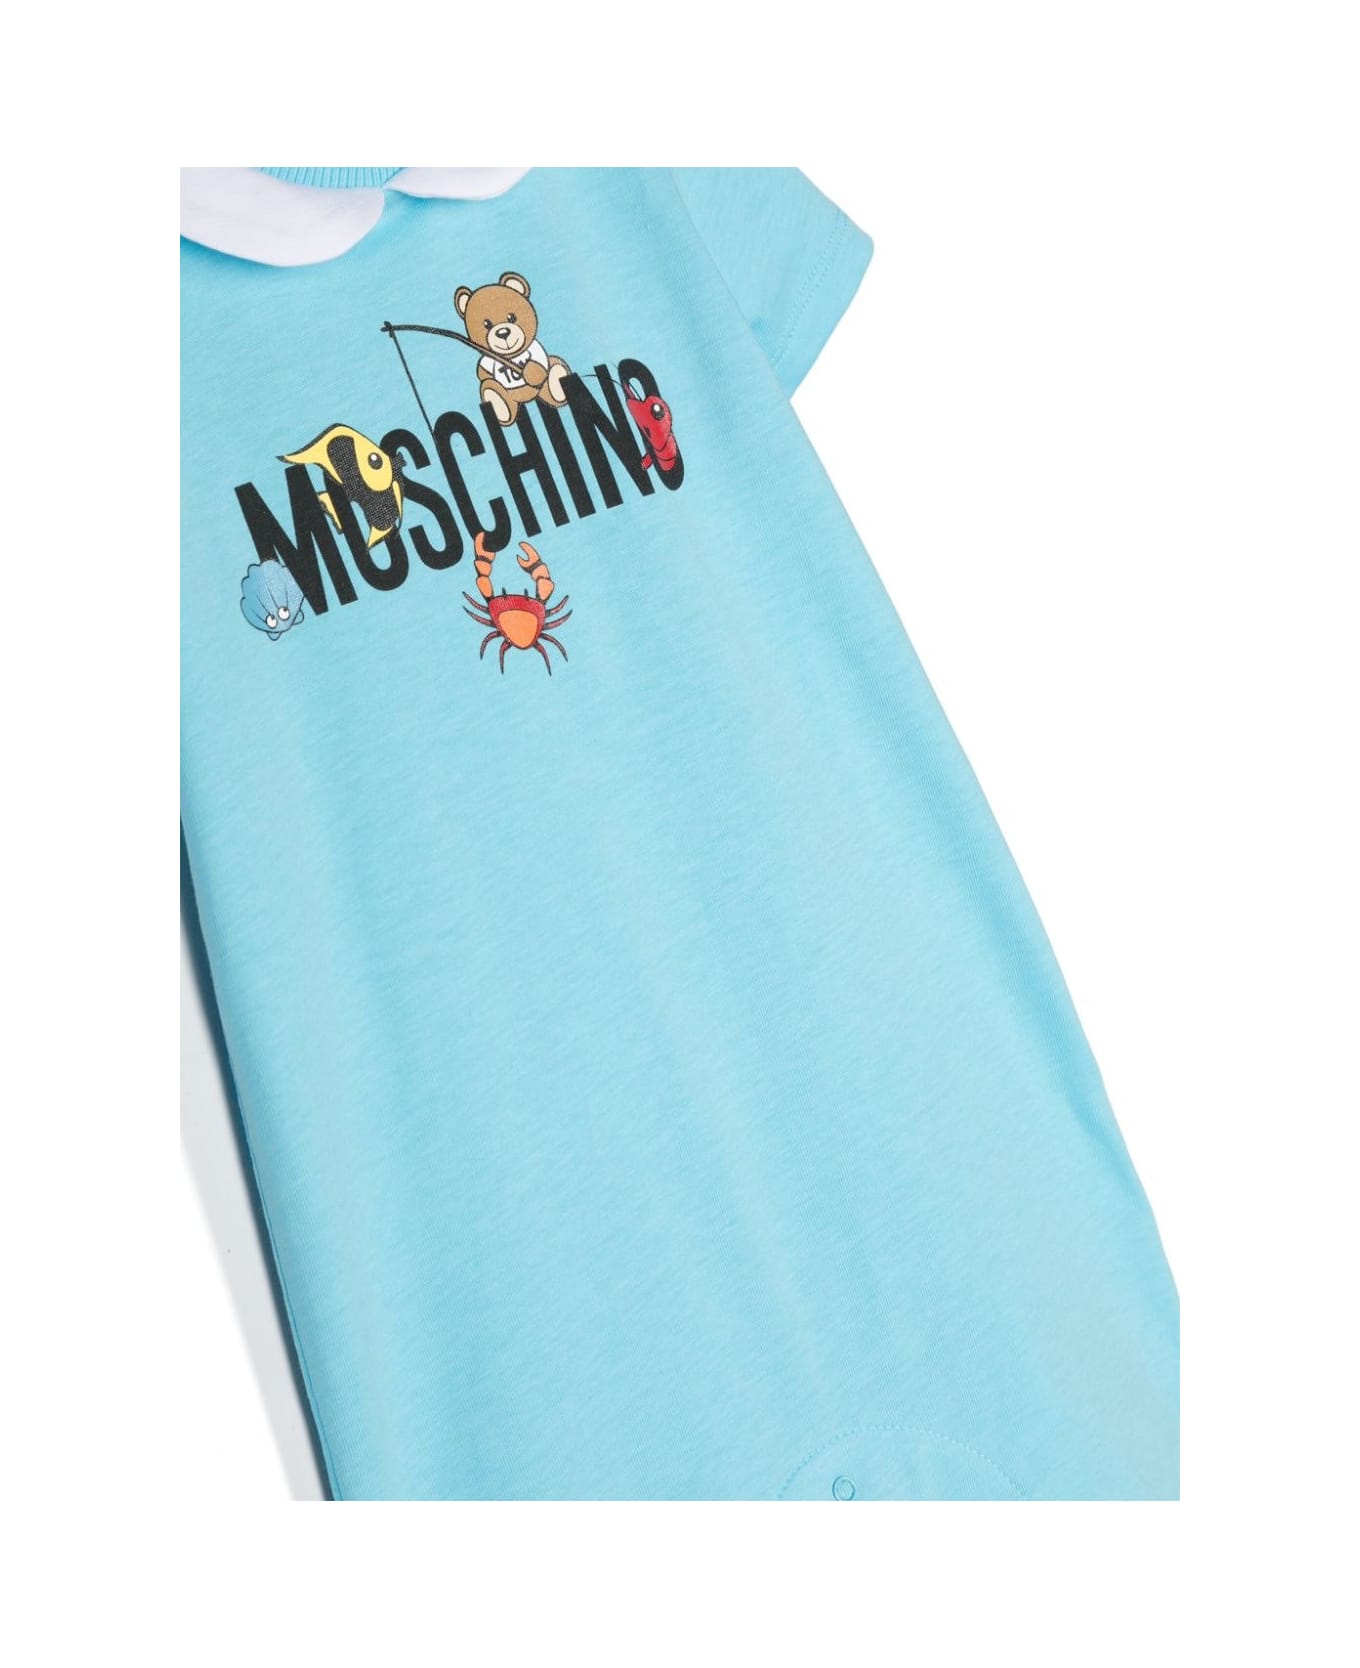 Moschino Short Light Blue Playsuit With Logo And Teddy Bear With Fish - Blue トップス